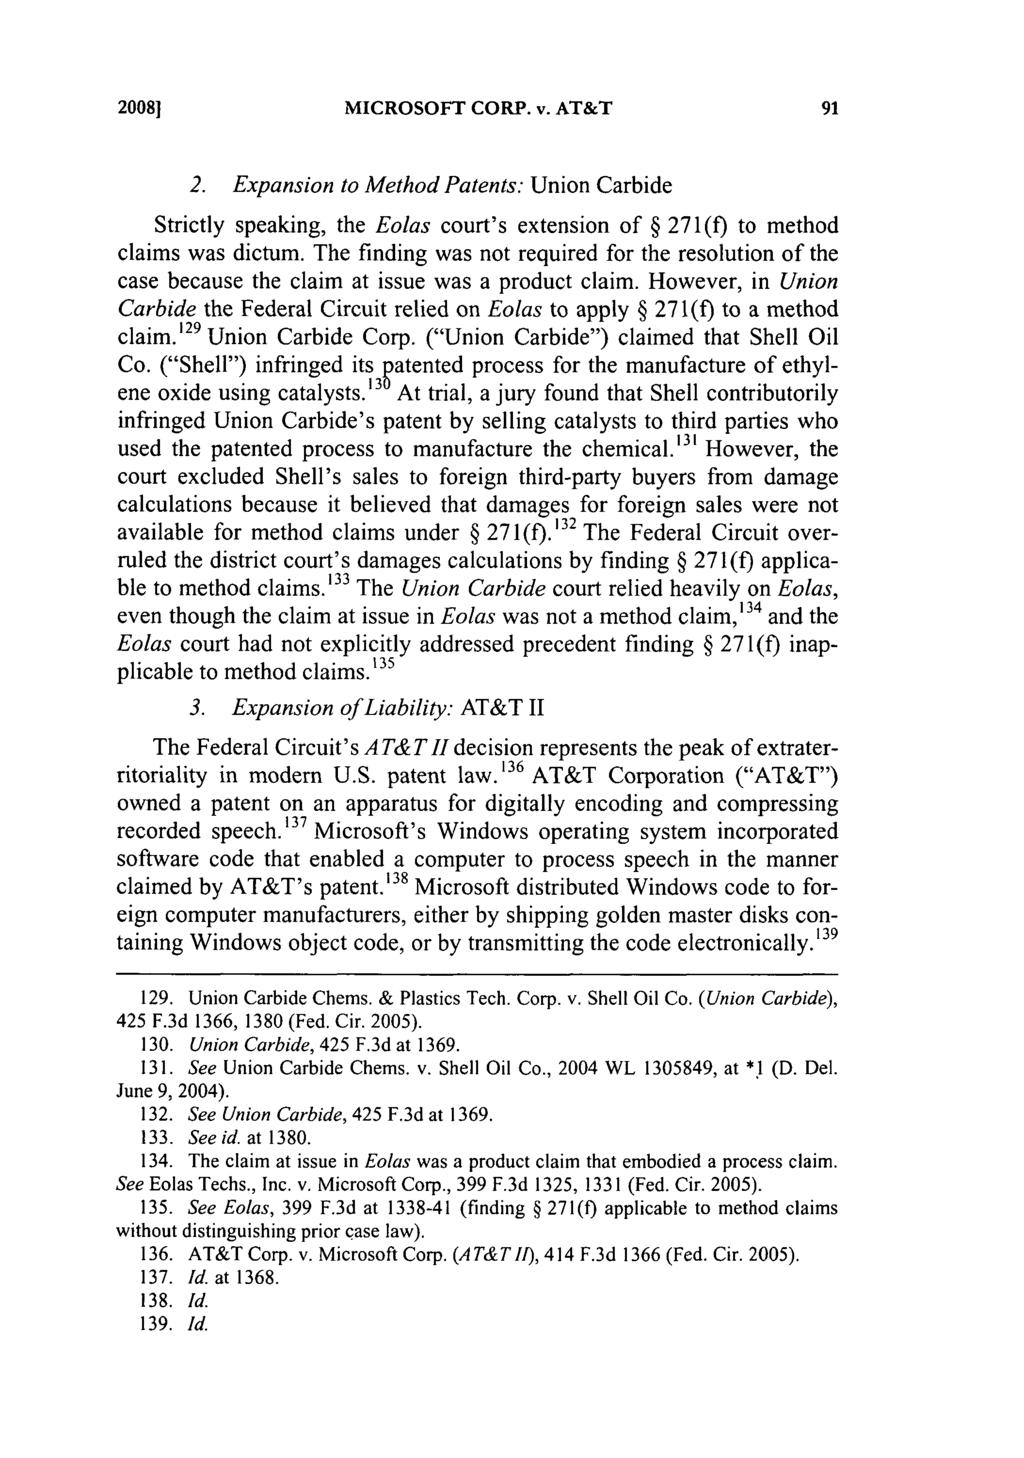 20081 MICROSOFT CORP. v. AT&T 2. Expansion to Method Patents: Union Carbide Strictly speaking, the Eolas court's extension of 271(f) to method claims was dictum.